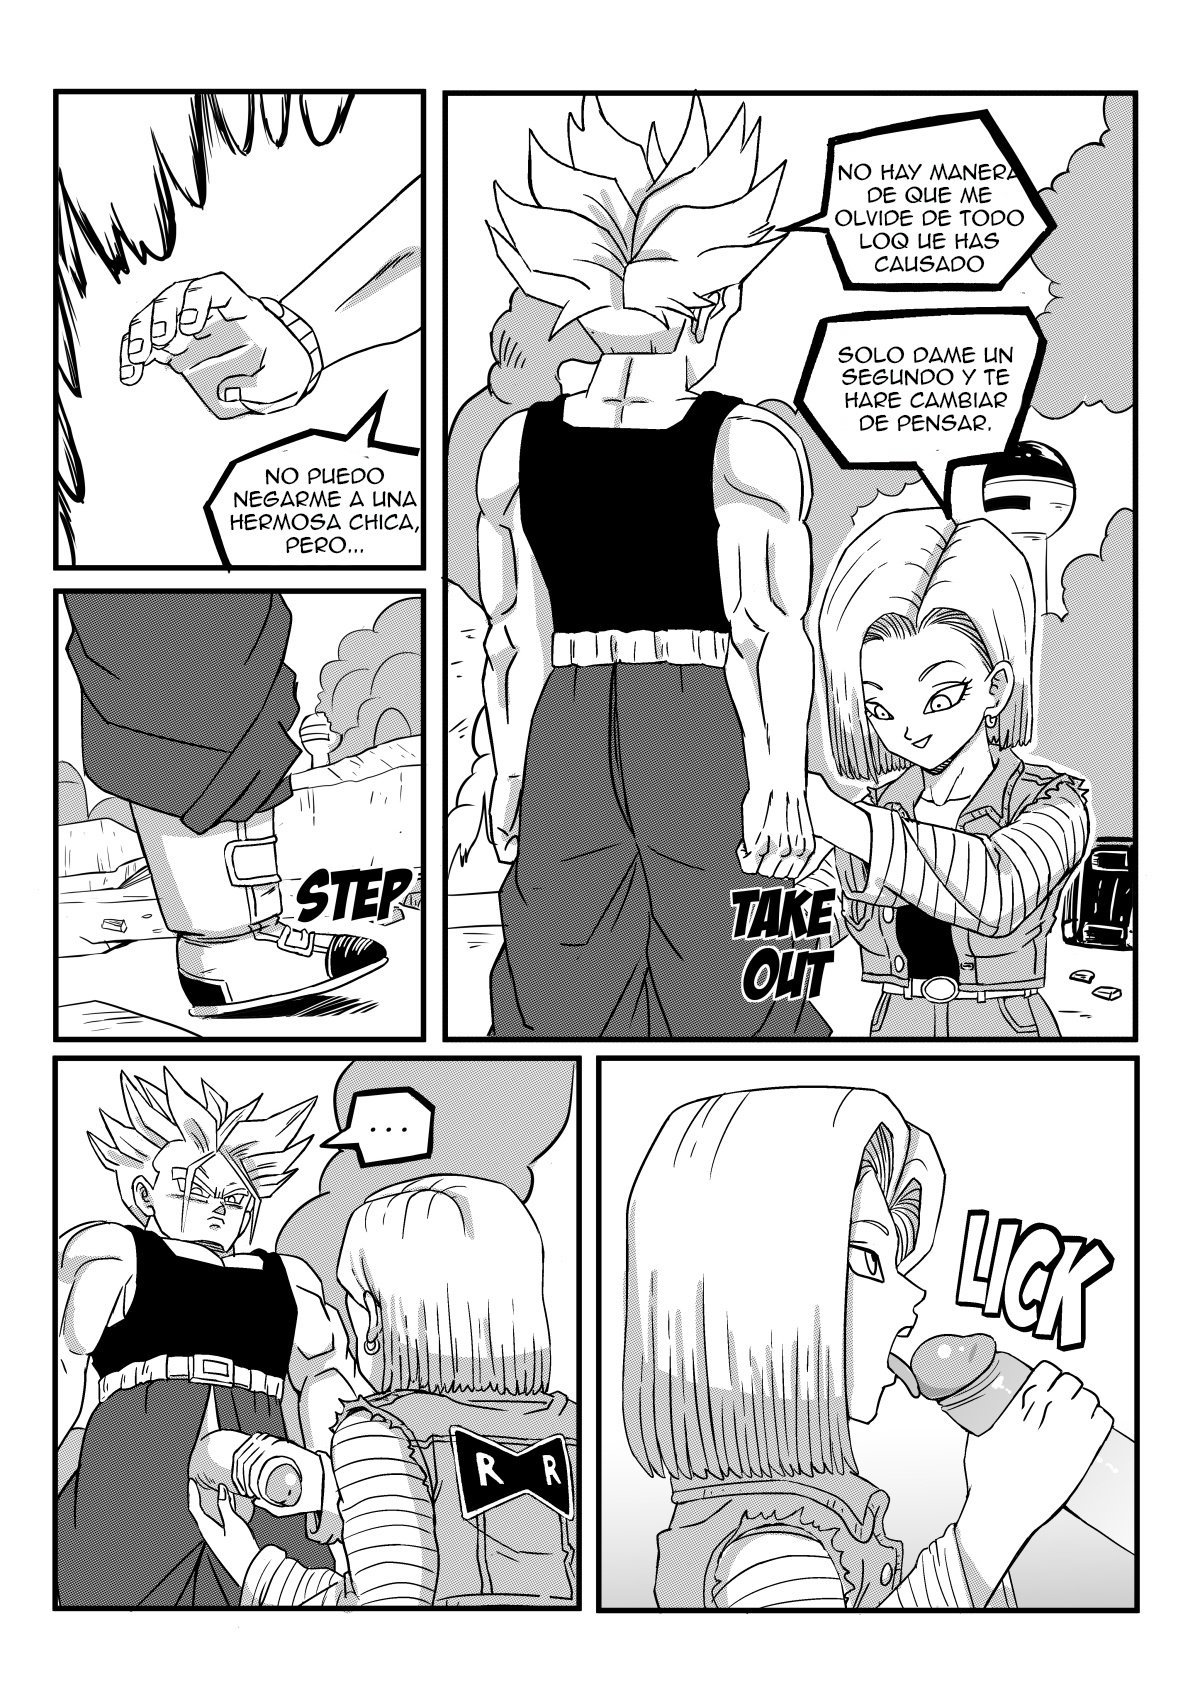 [PinkPawg] Android 18 Stays in the Future (Dragon Ball Z) [Spanish]